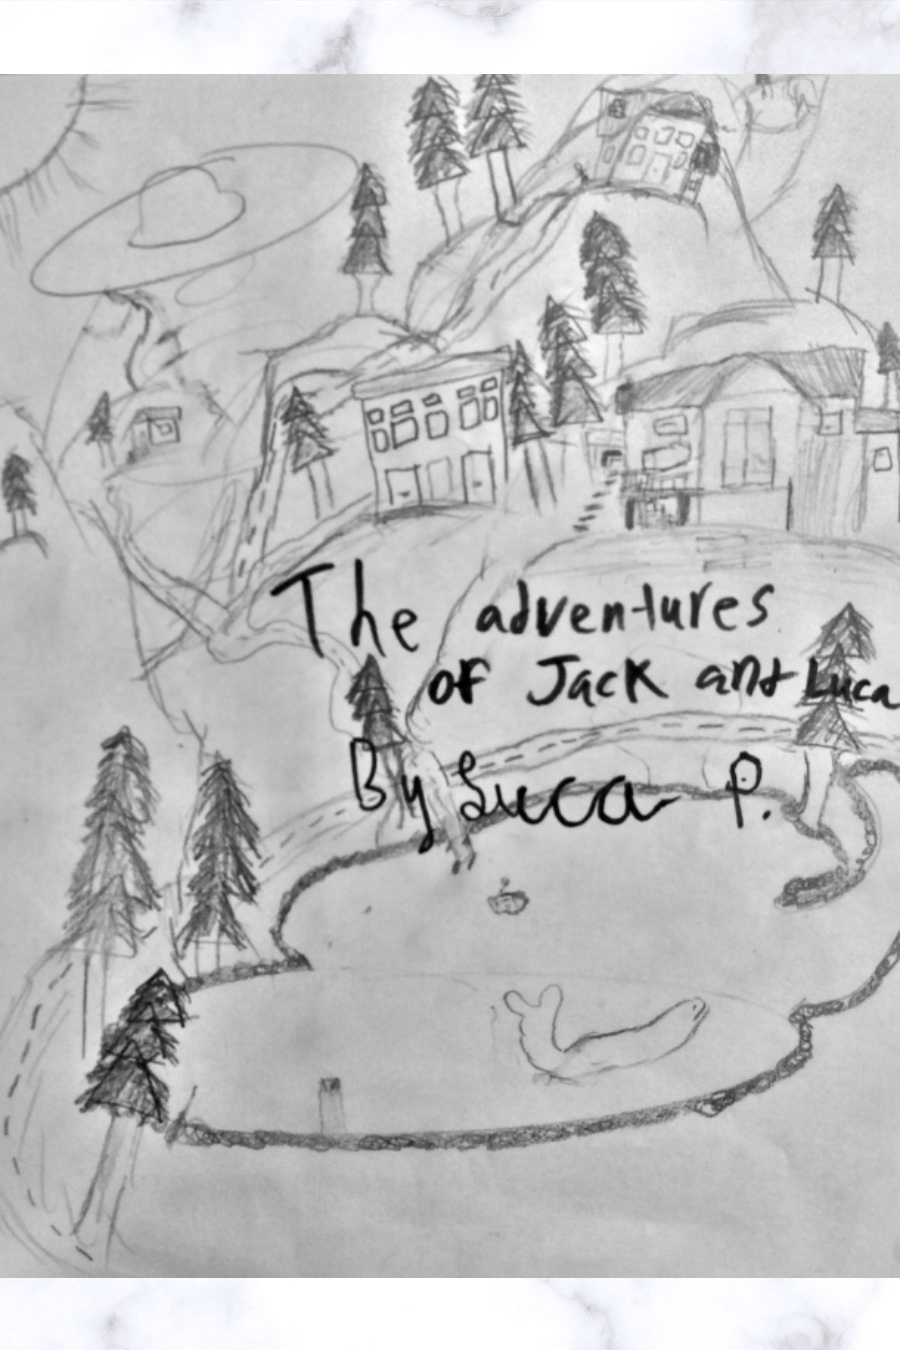 The Adventures of Jack and Luca by Luca P